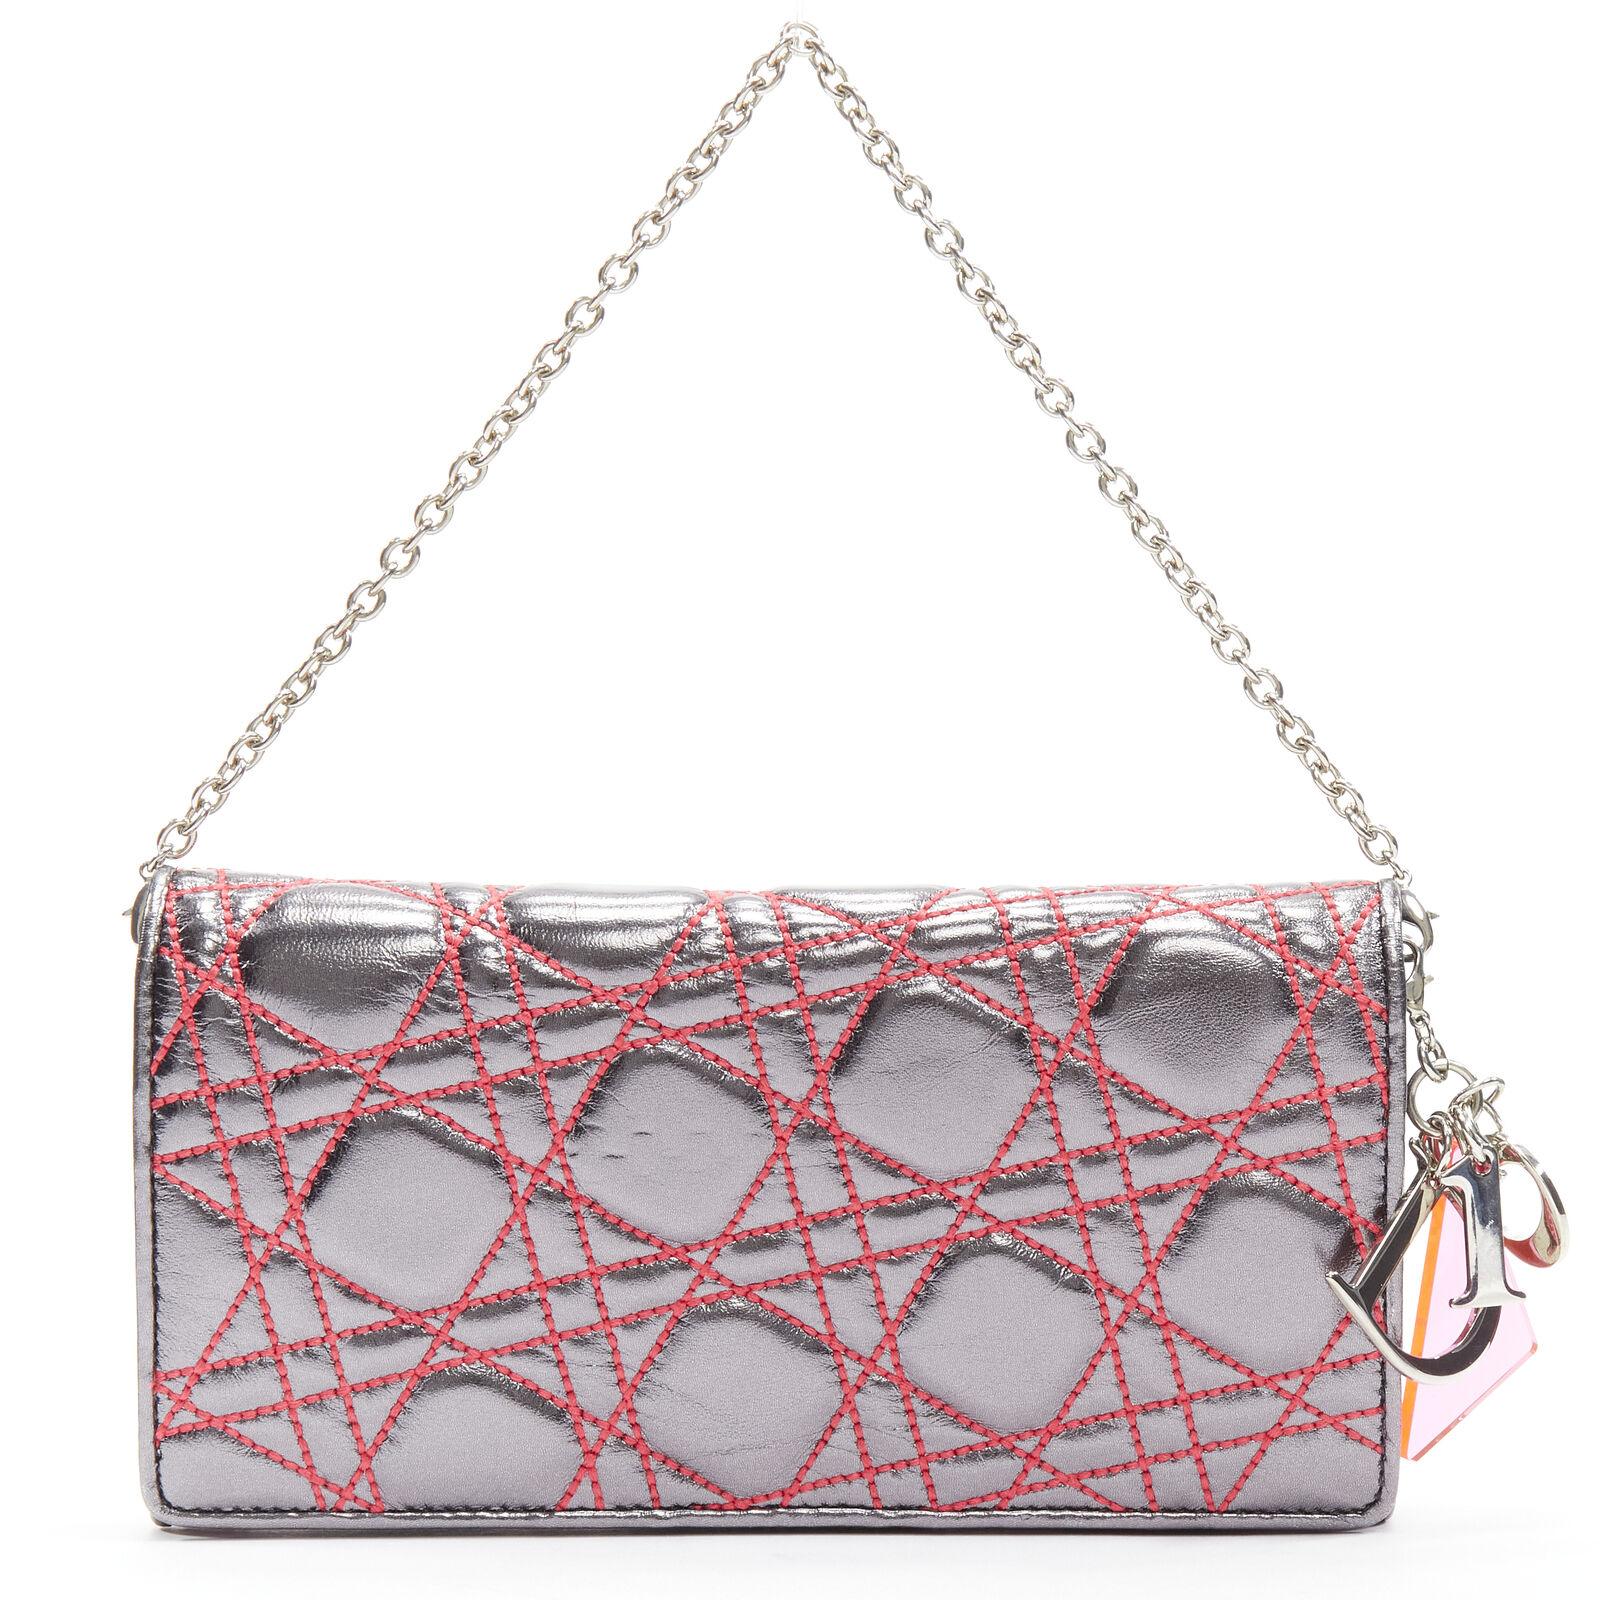 CHRISTIAN DIOR 2011 Anselm Reyle silver neon pink Cannage wallet on chain bag